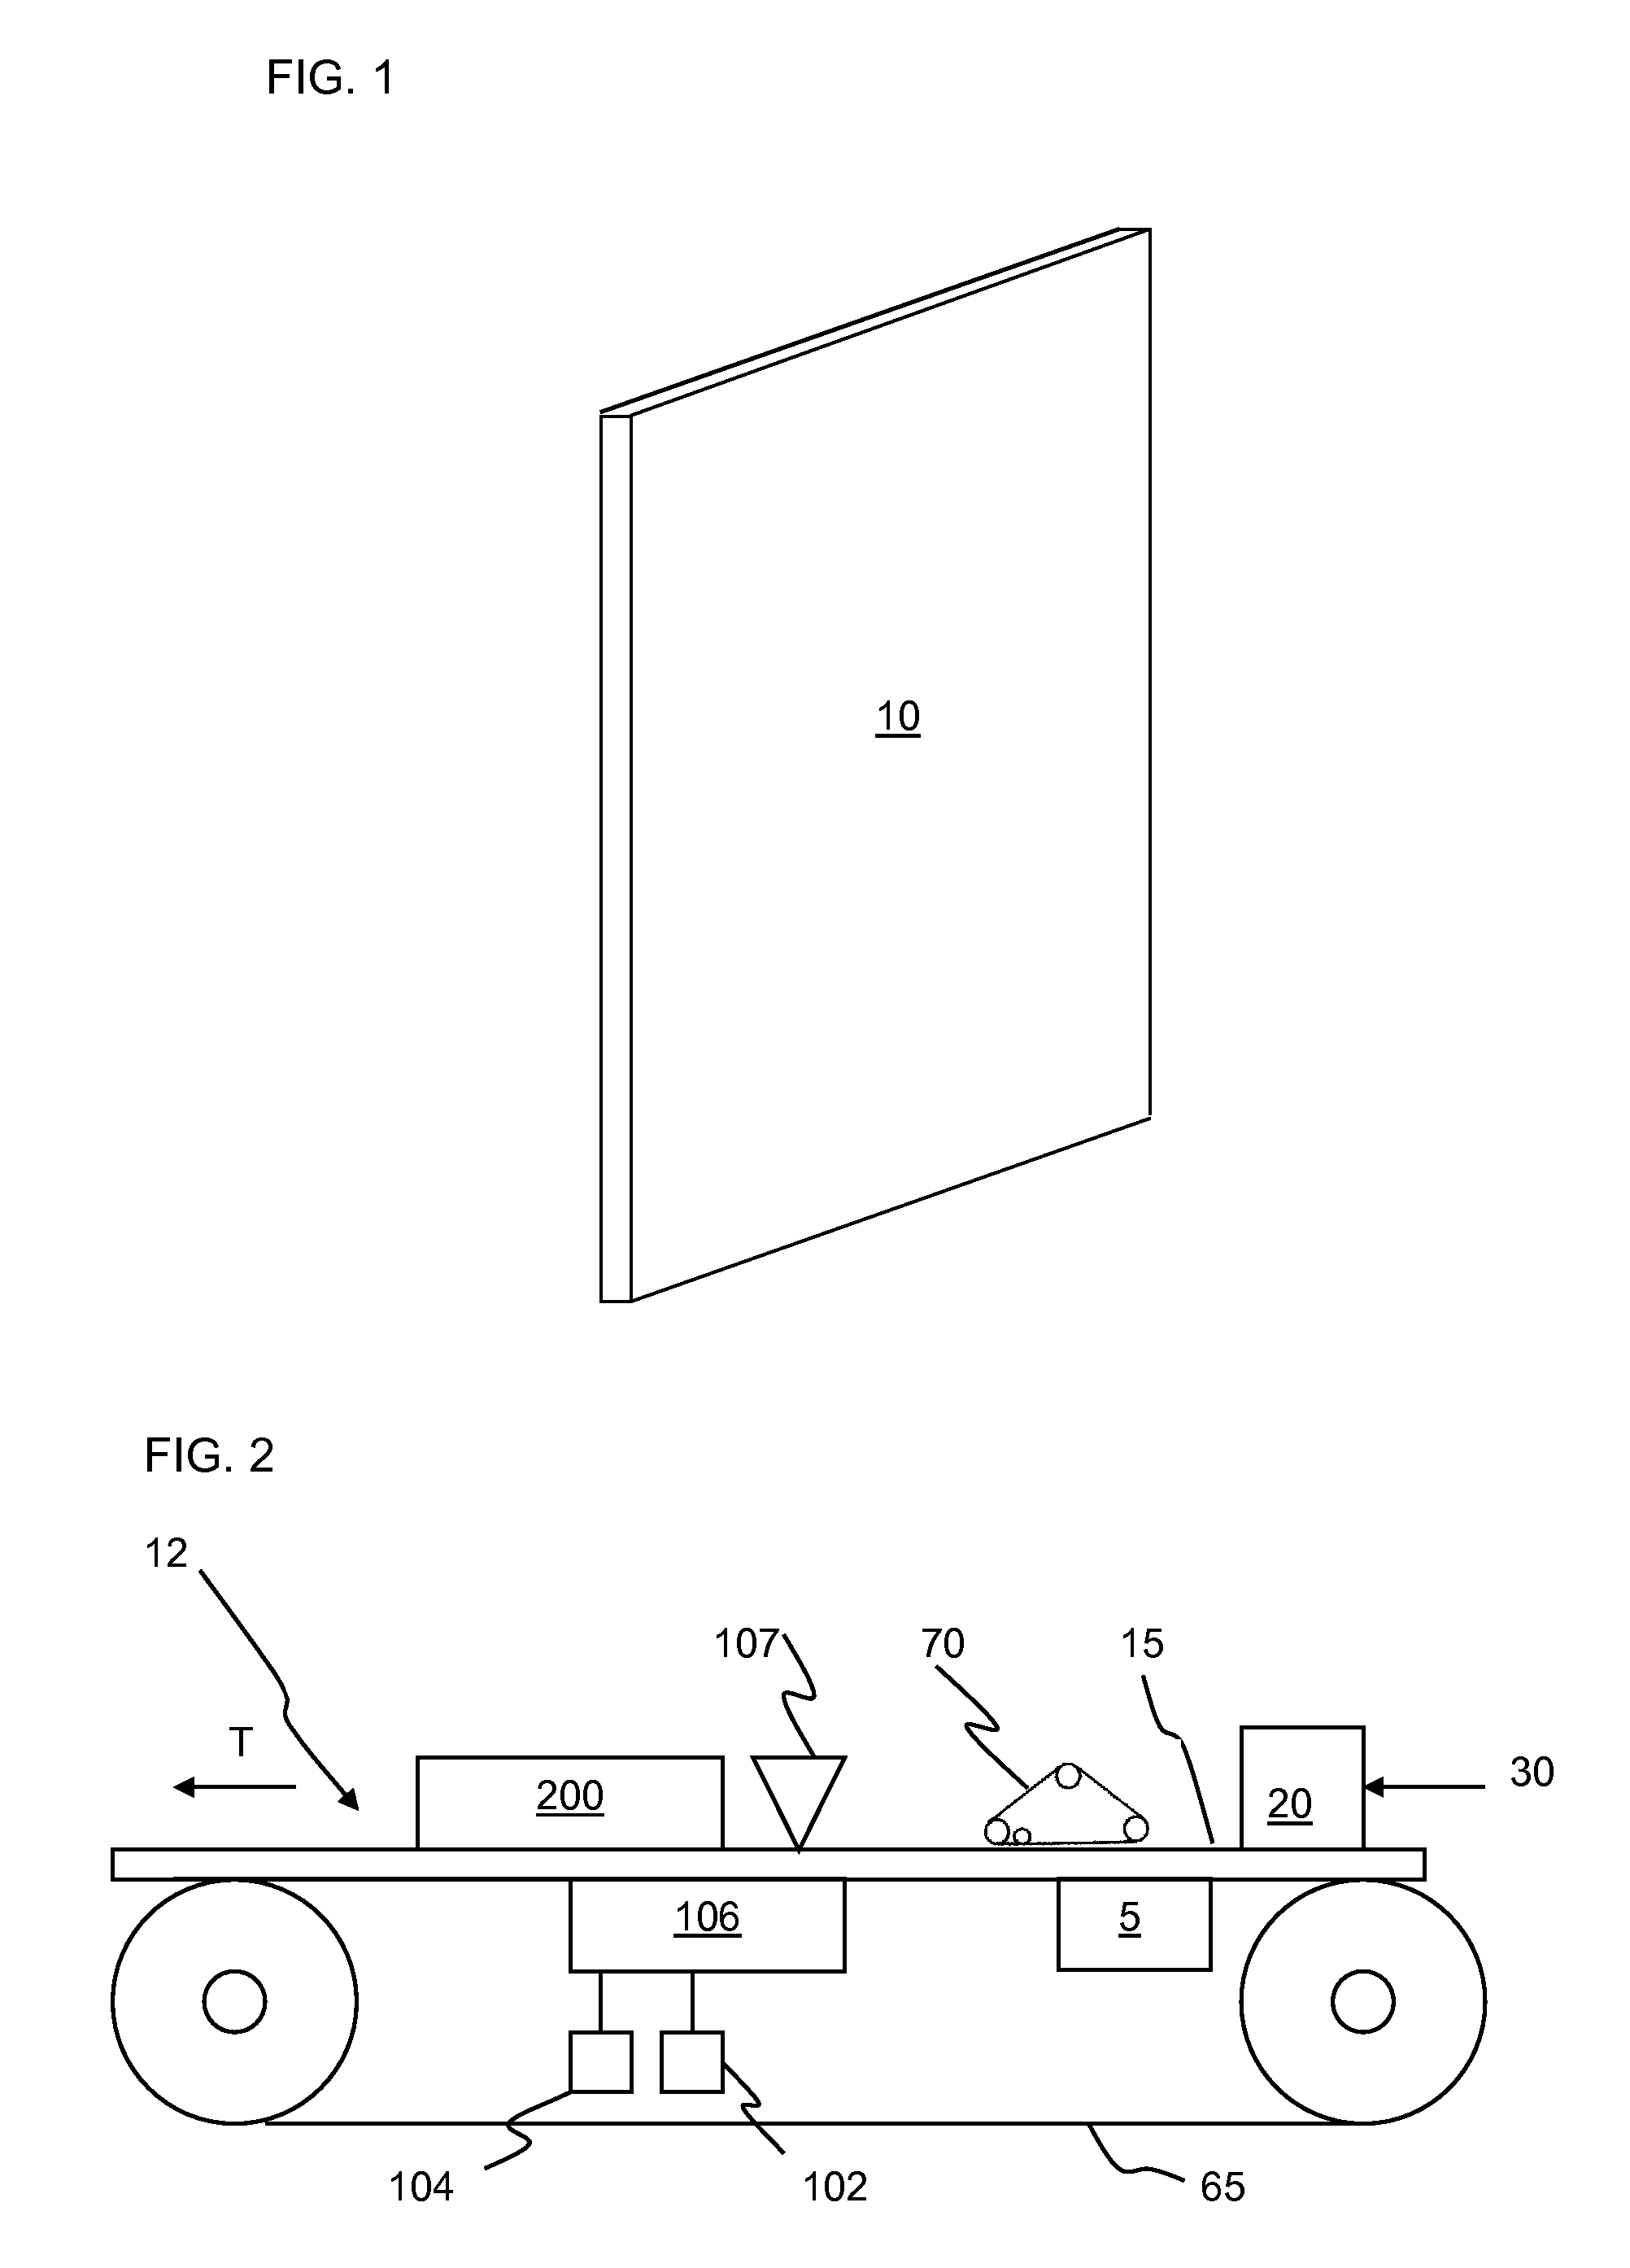 Process for producing a low density acoustical panel with improved sound absorption